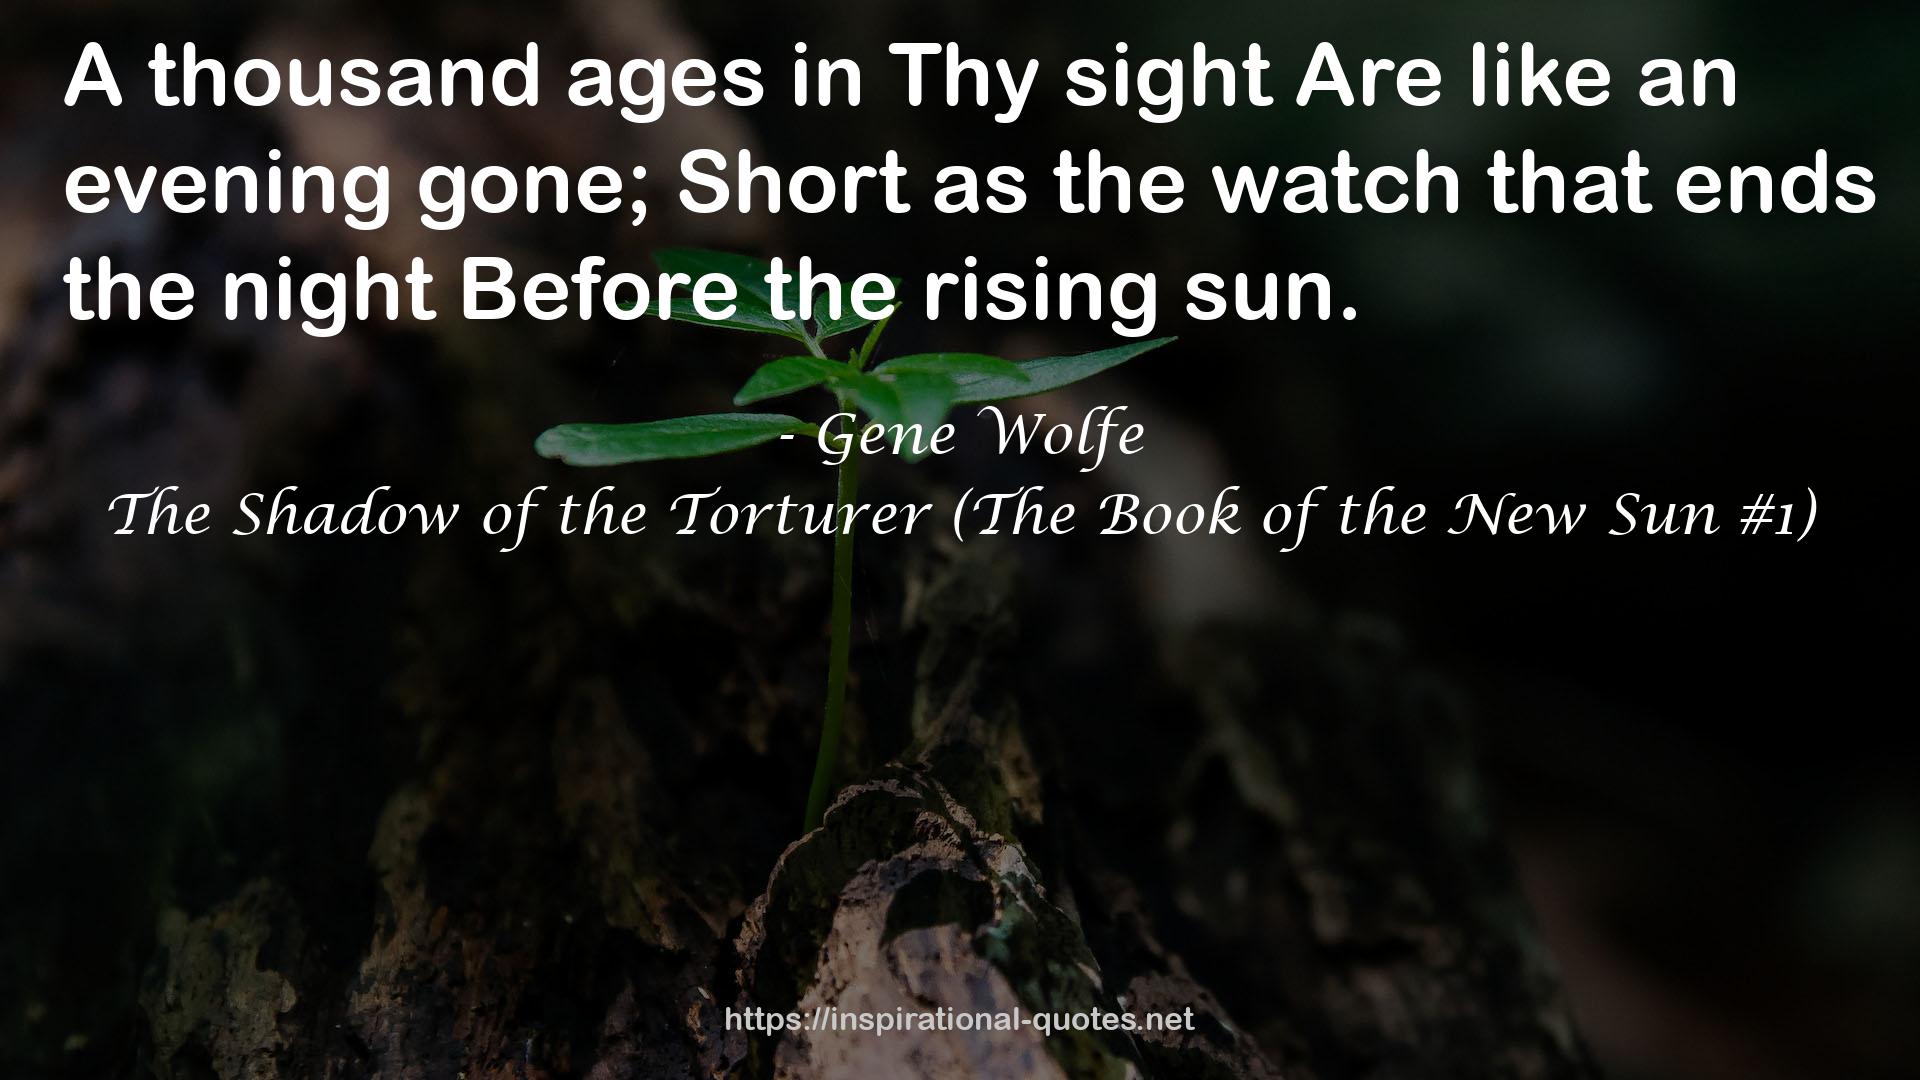 The Shadow of the Torturer (The Book of the New Sun #1) QUOTES